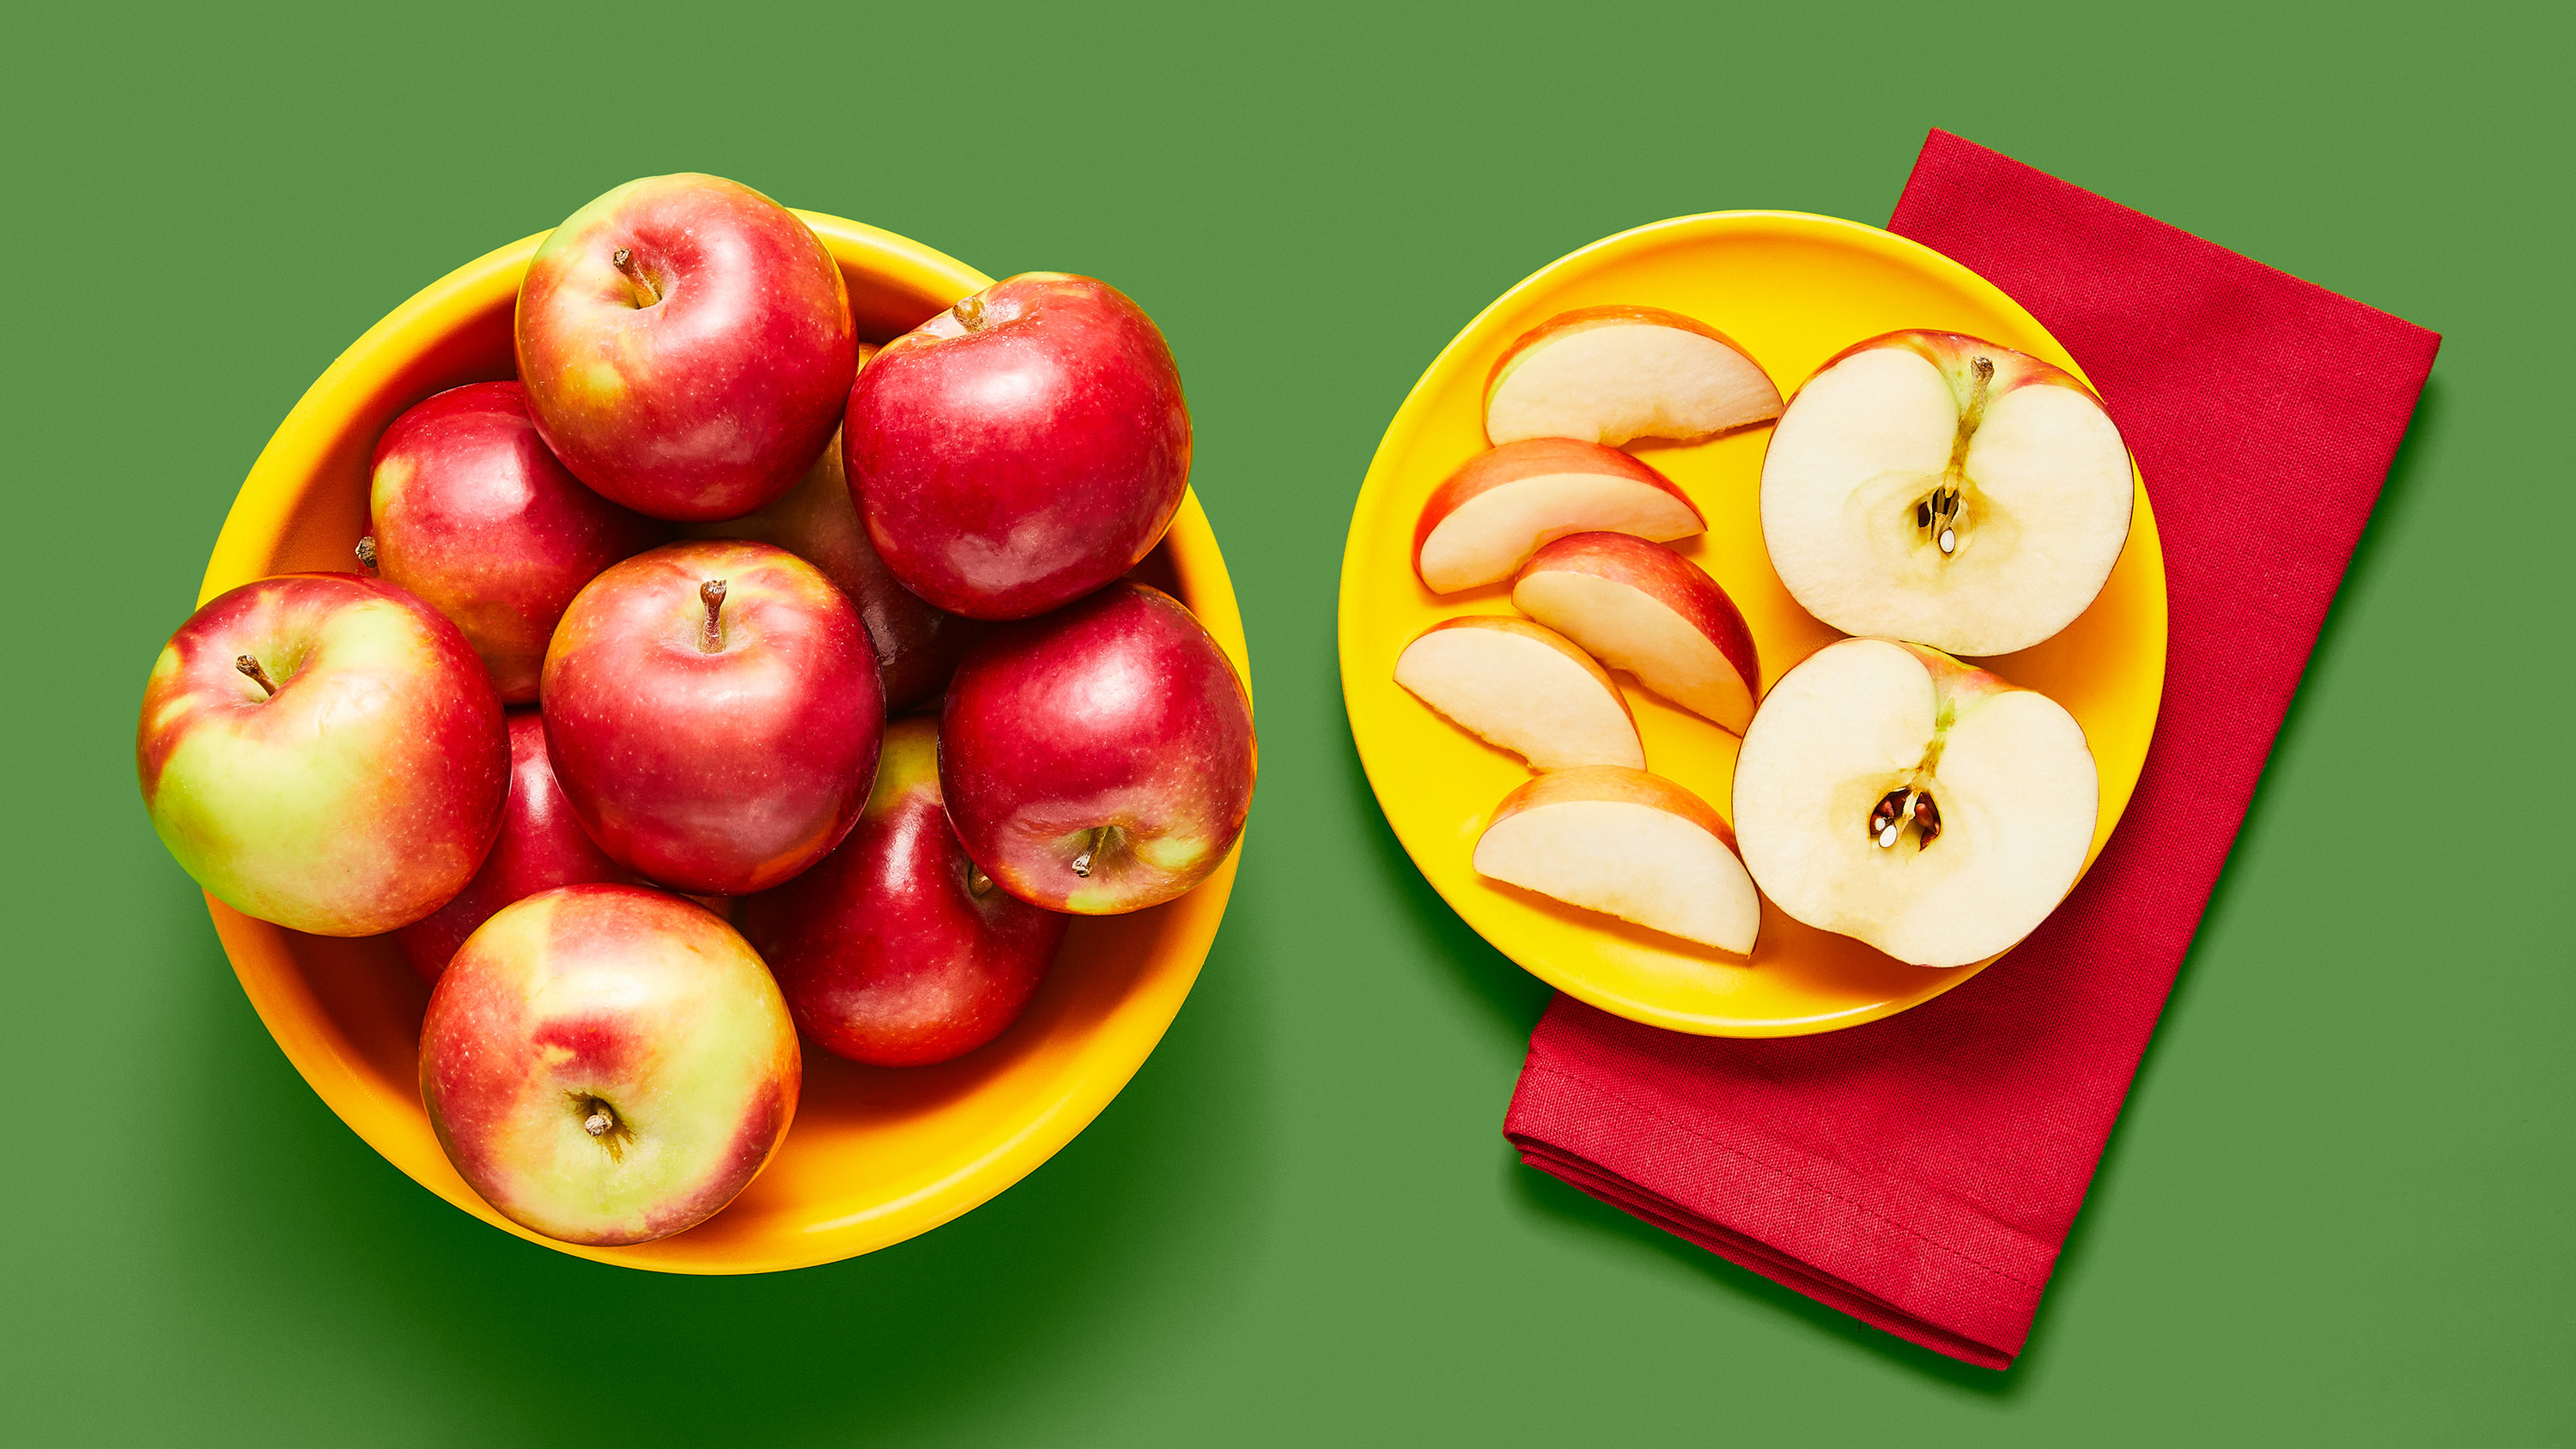 A plate of sliced apples sits beside a larger bowl of whole apples